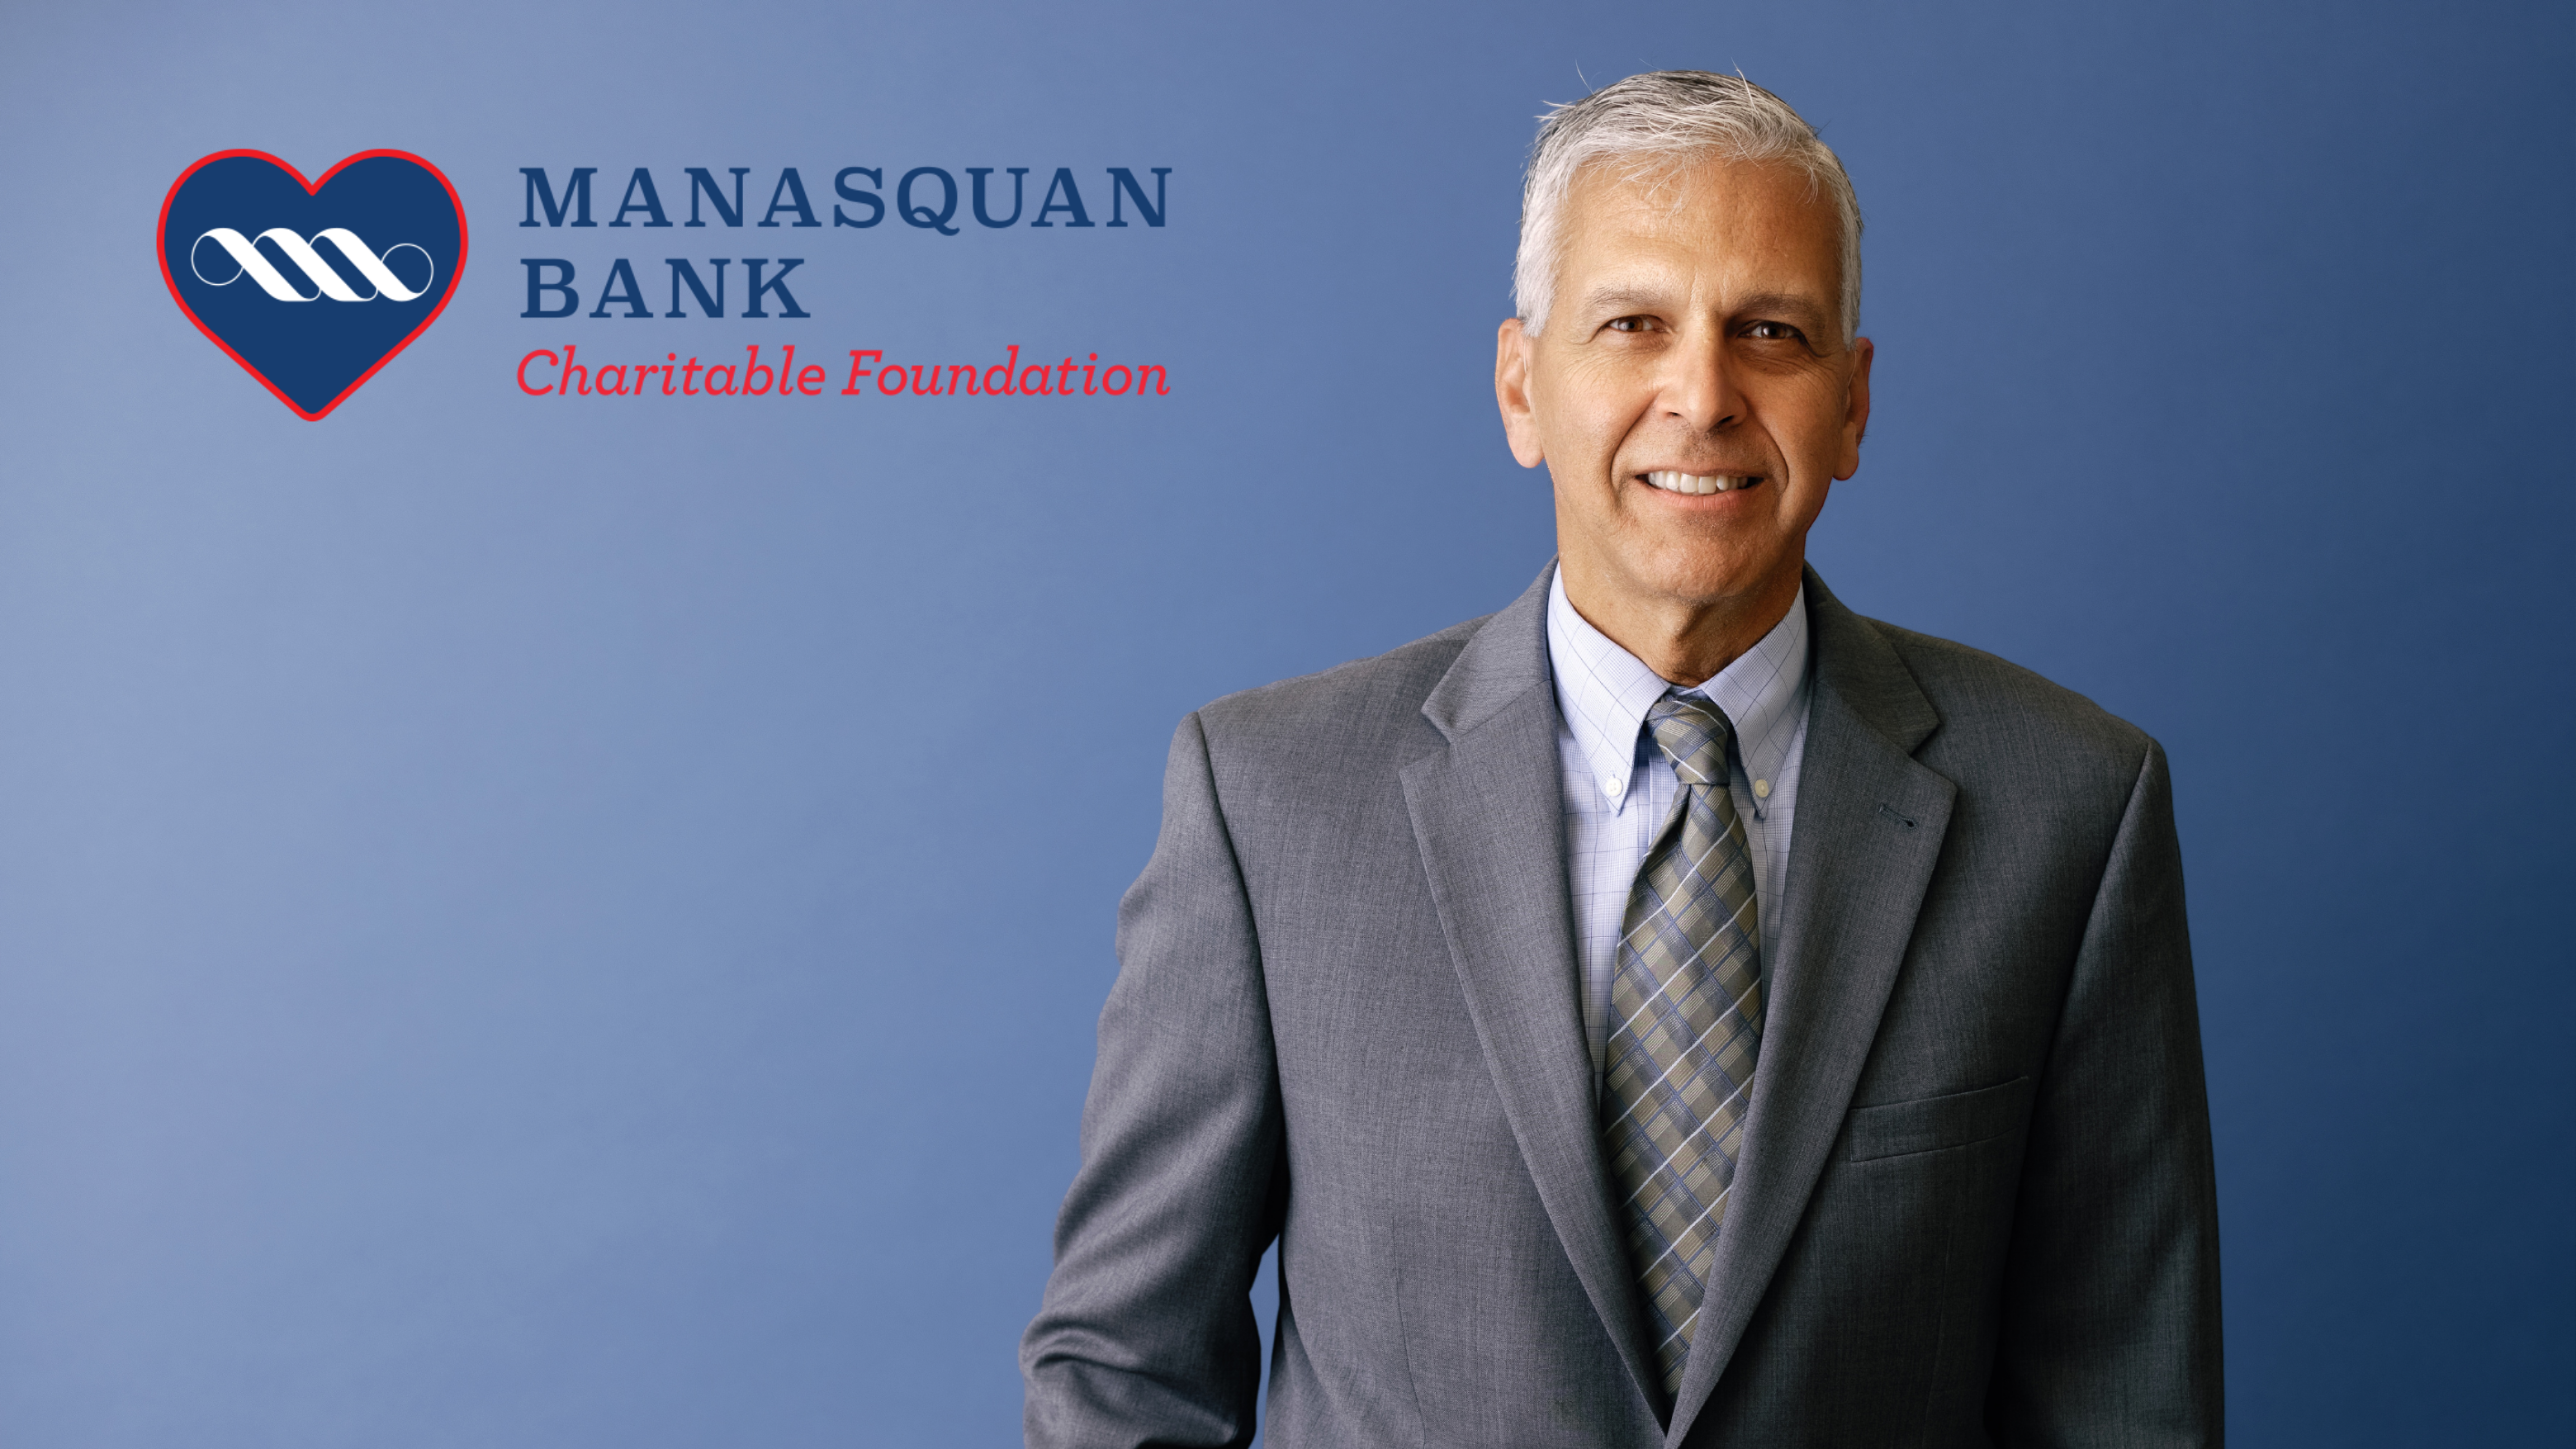 Manasquan Bank Charitable Foundation Appoints Andy Sisti as Trustee